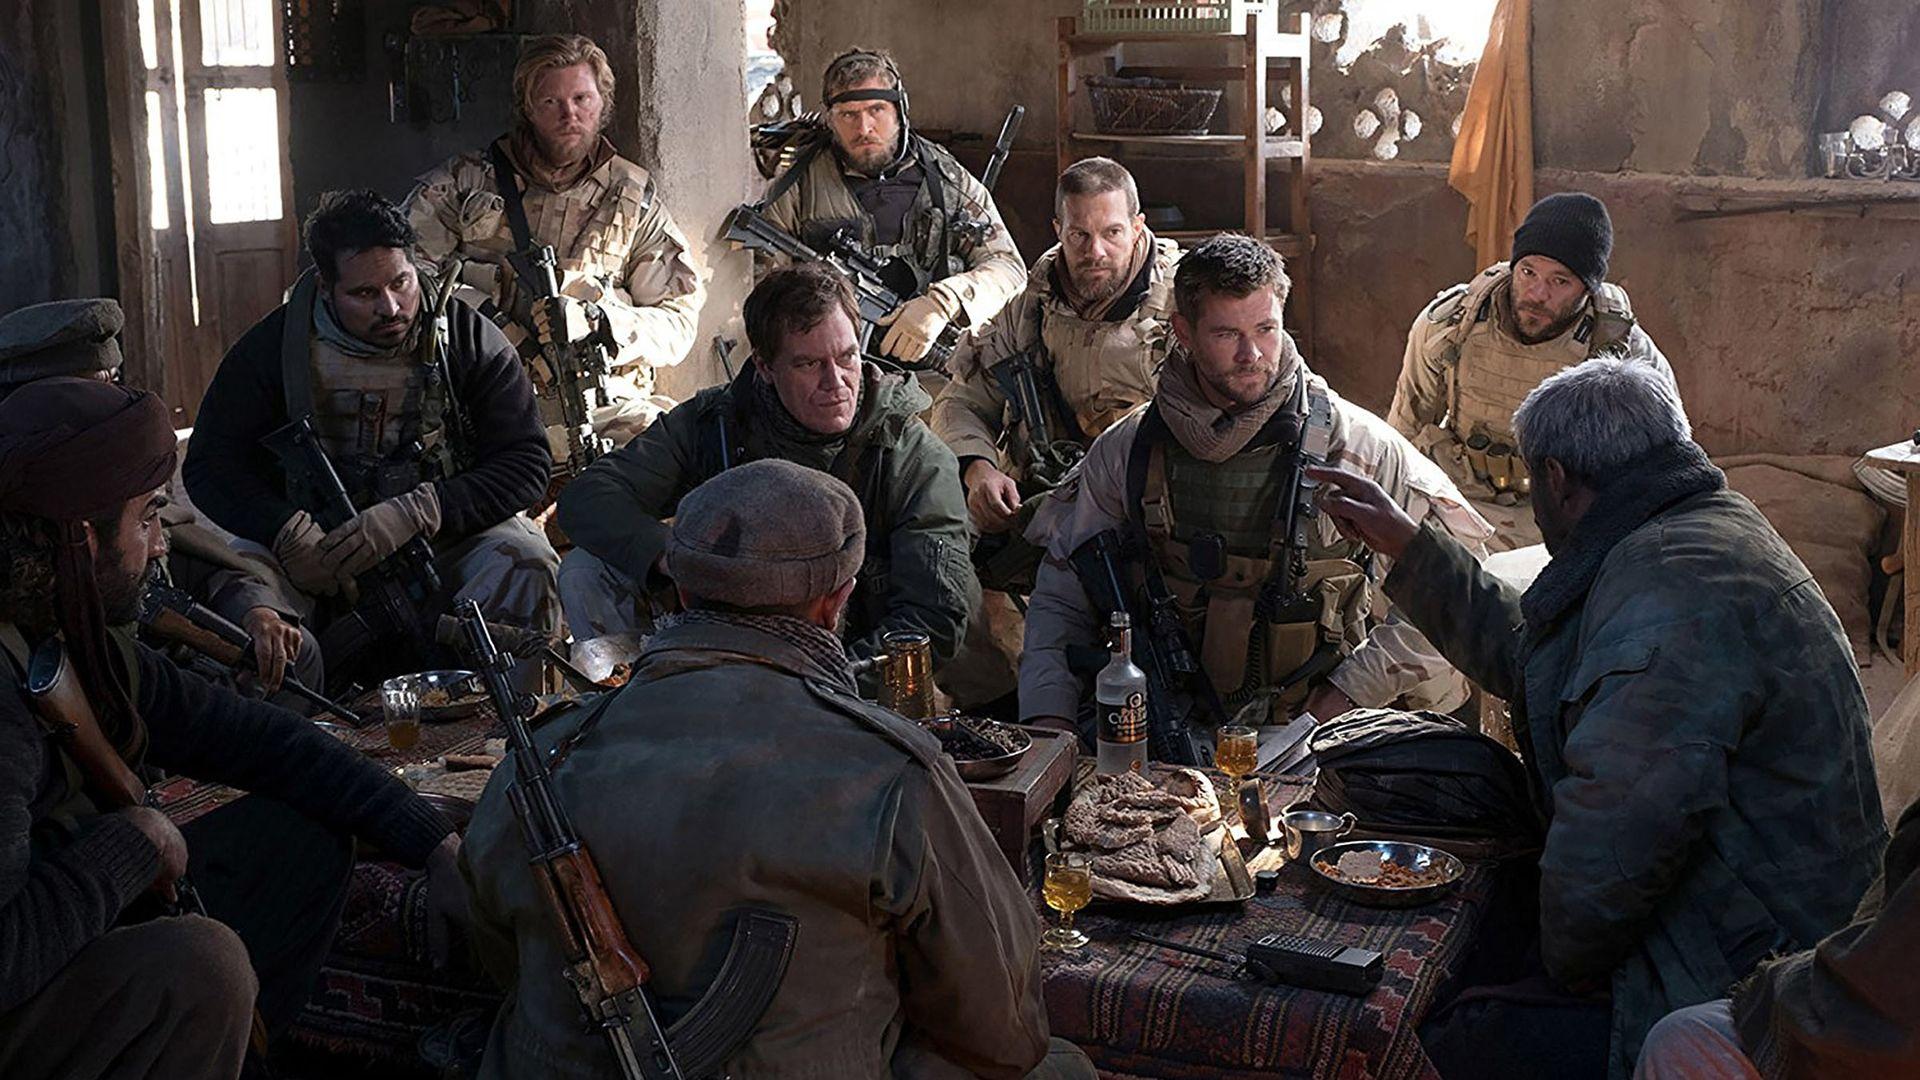 HD 12 Strong 2018 Movie Cast